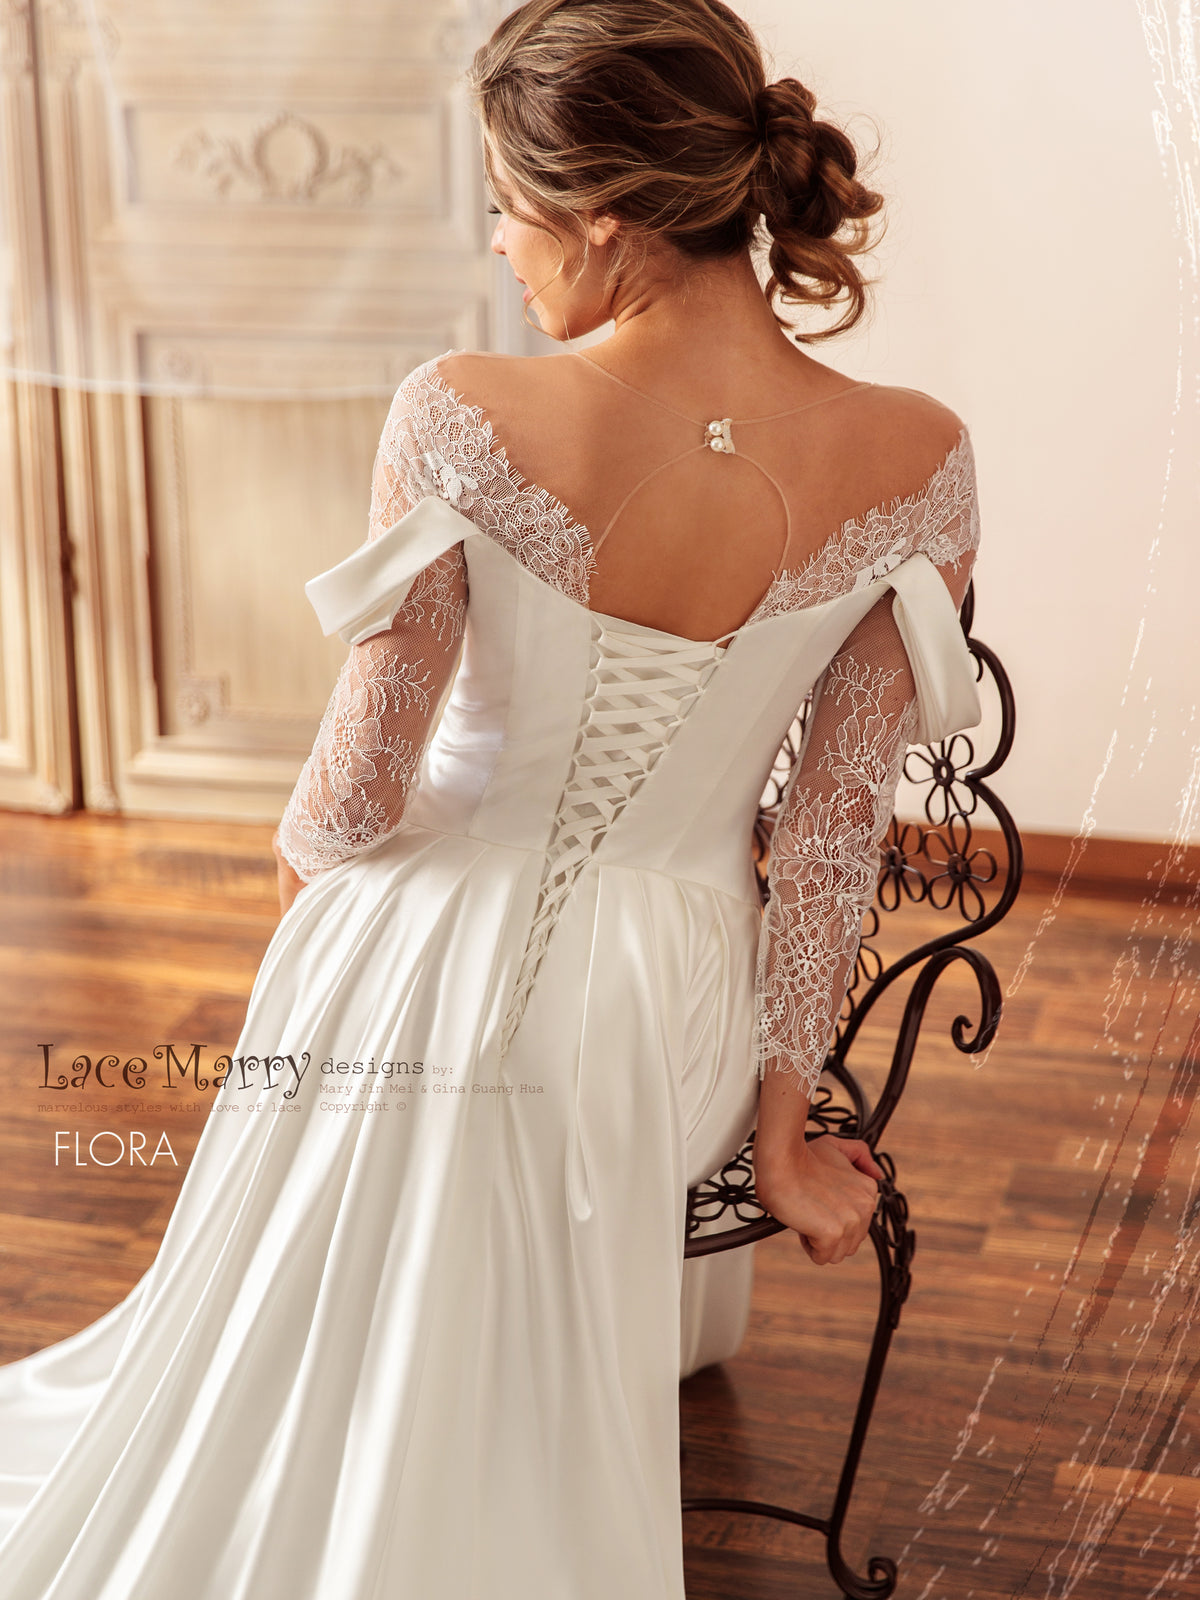 FLORA / Illusion Neck Lace Wedding Dress with Slit on the Skirt